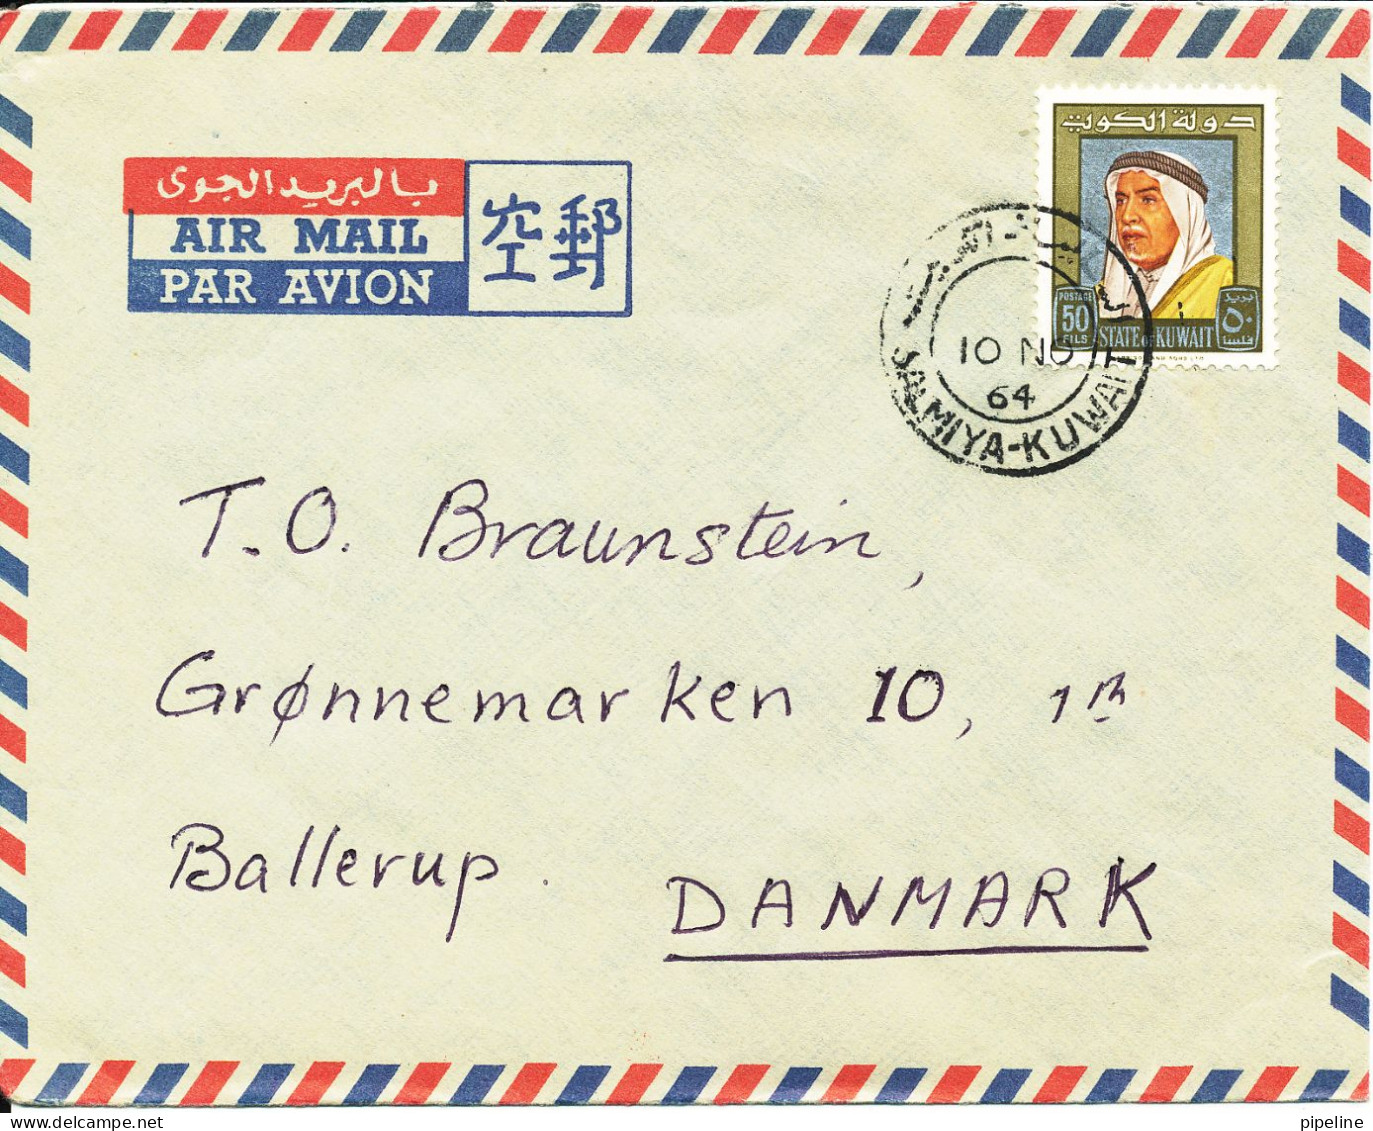 Kuwait Air Mail Cover Sent To Denmark 10-11-1964 Single Franked - Kuwait